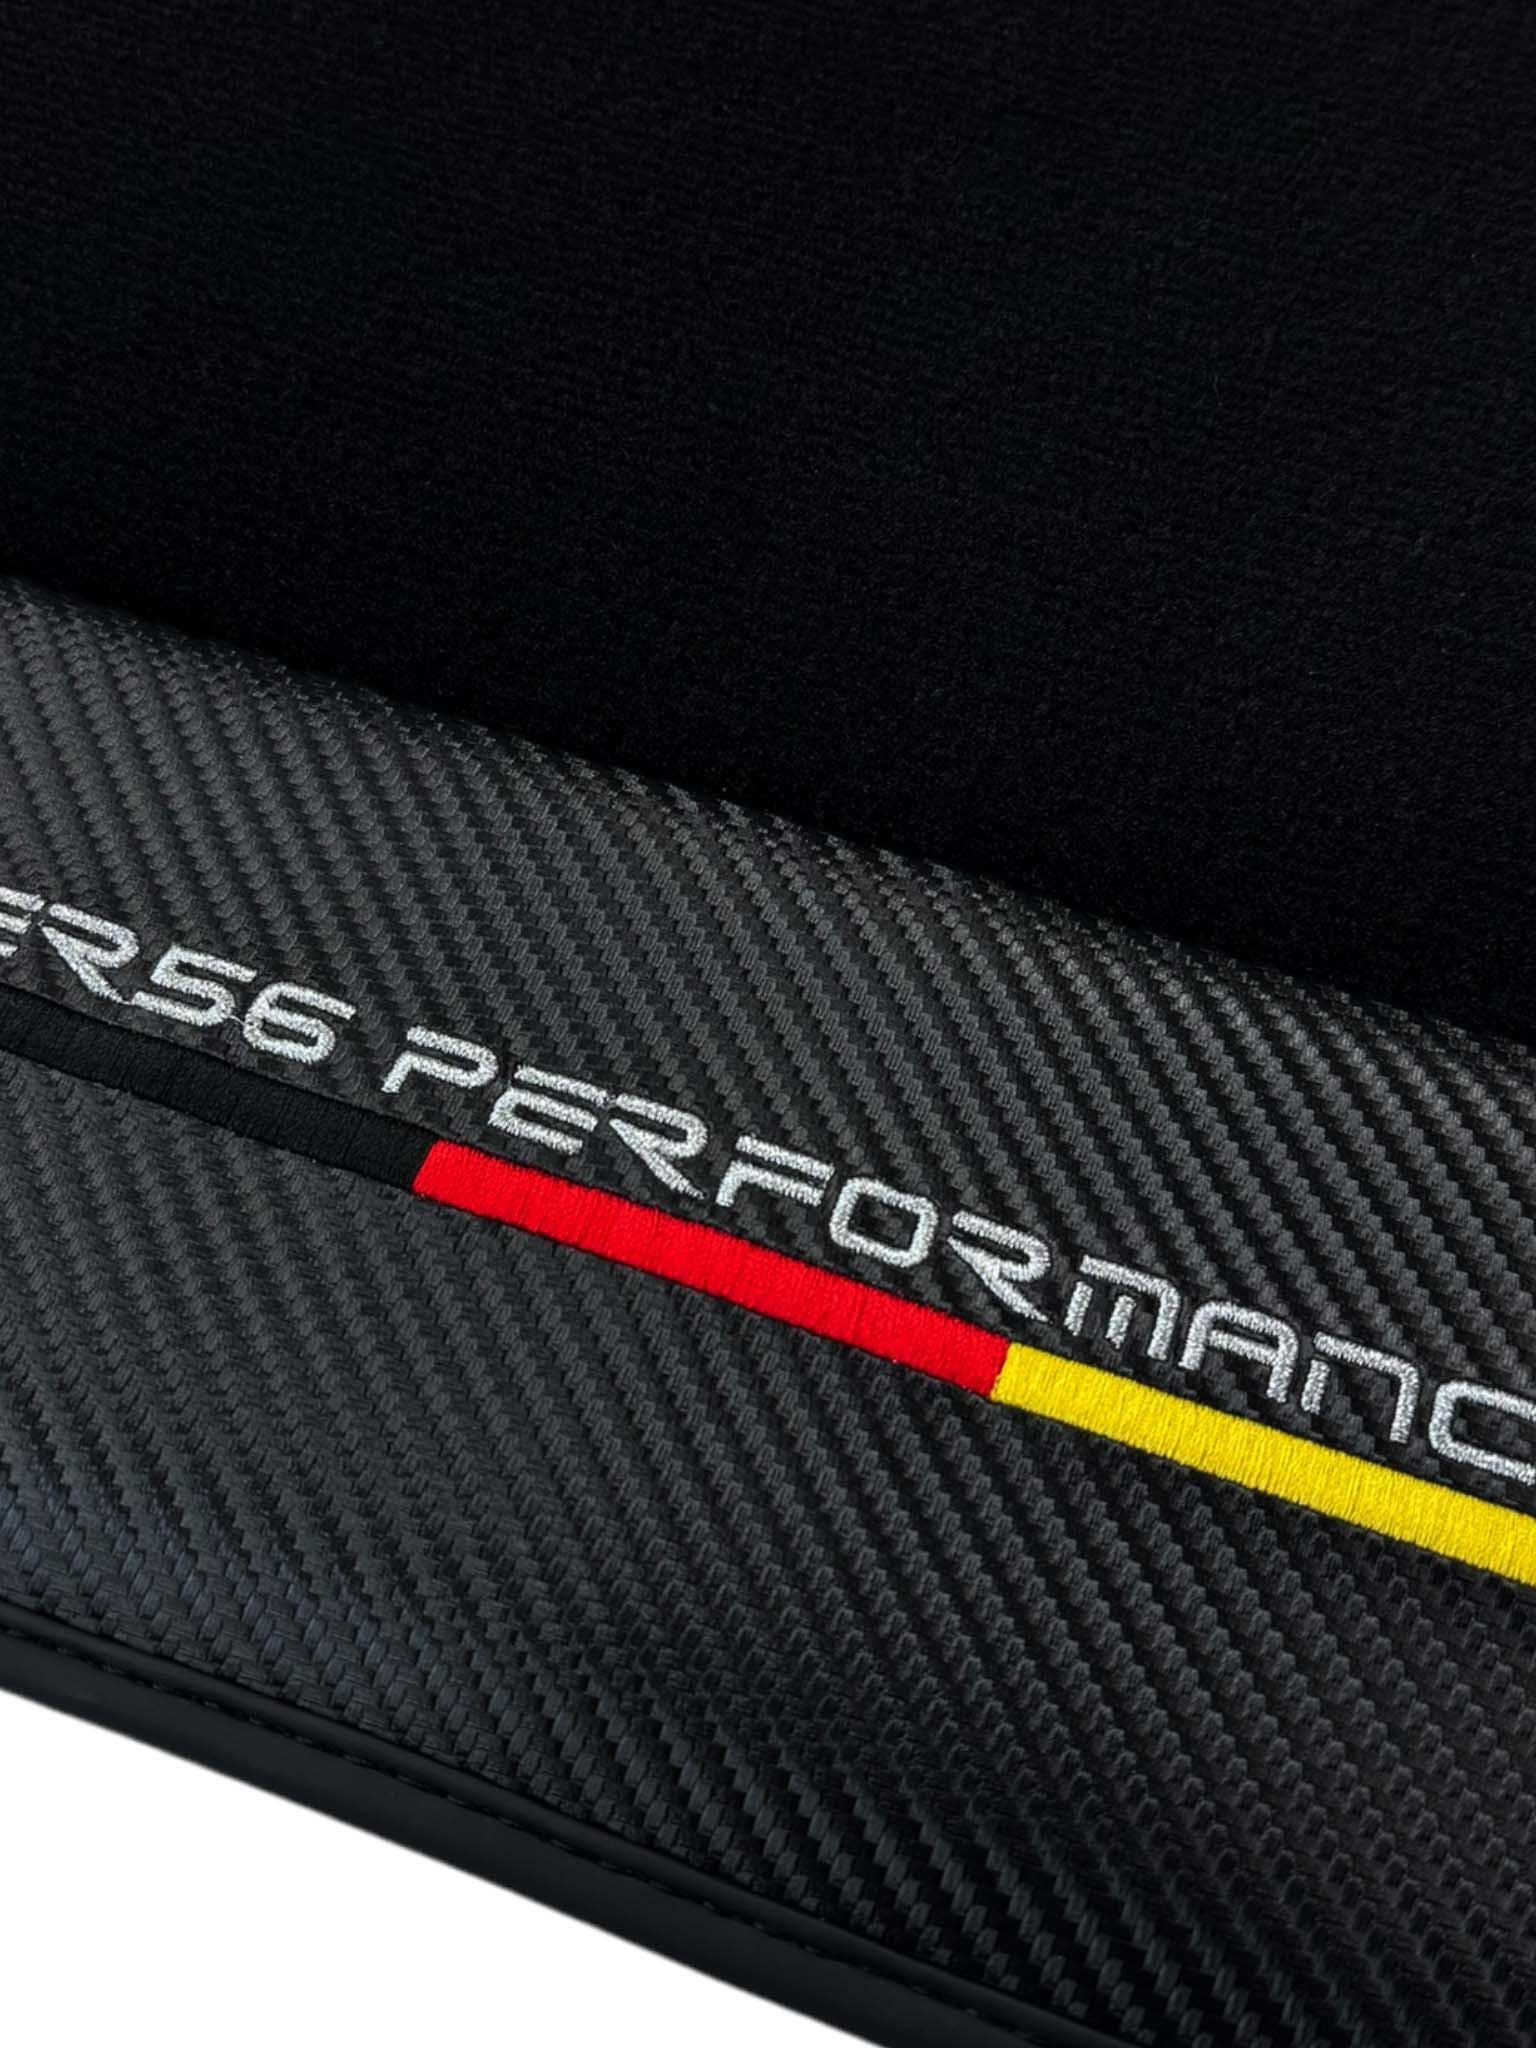 Black Floor Floor Mats For BMW 6 Series F06 Gran Coupe | ER56 Performance | Carbon Edition